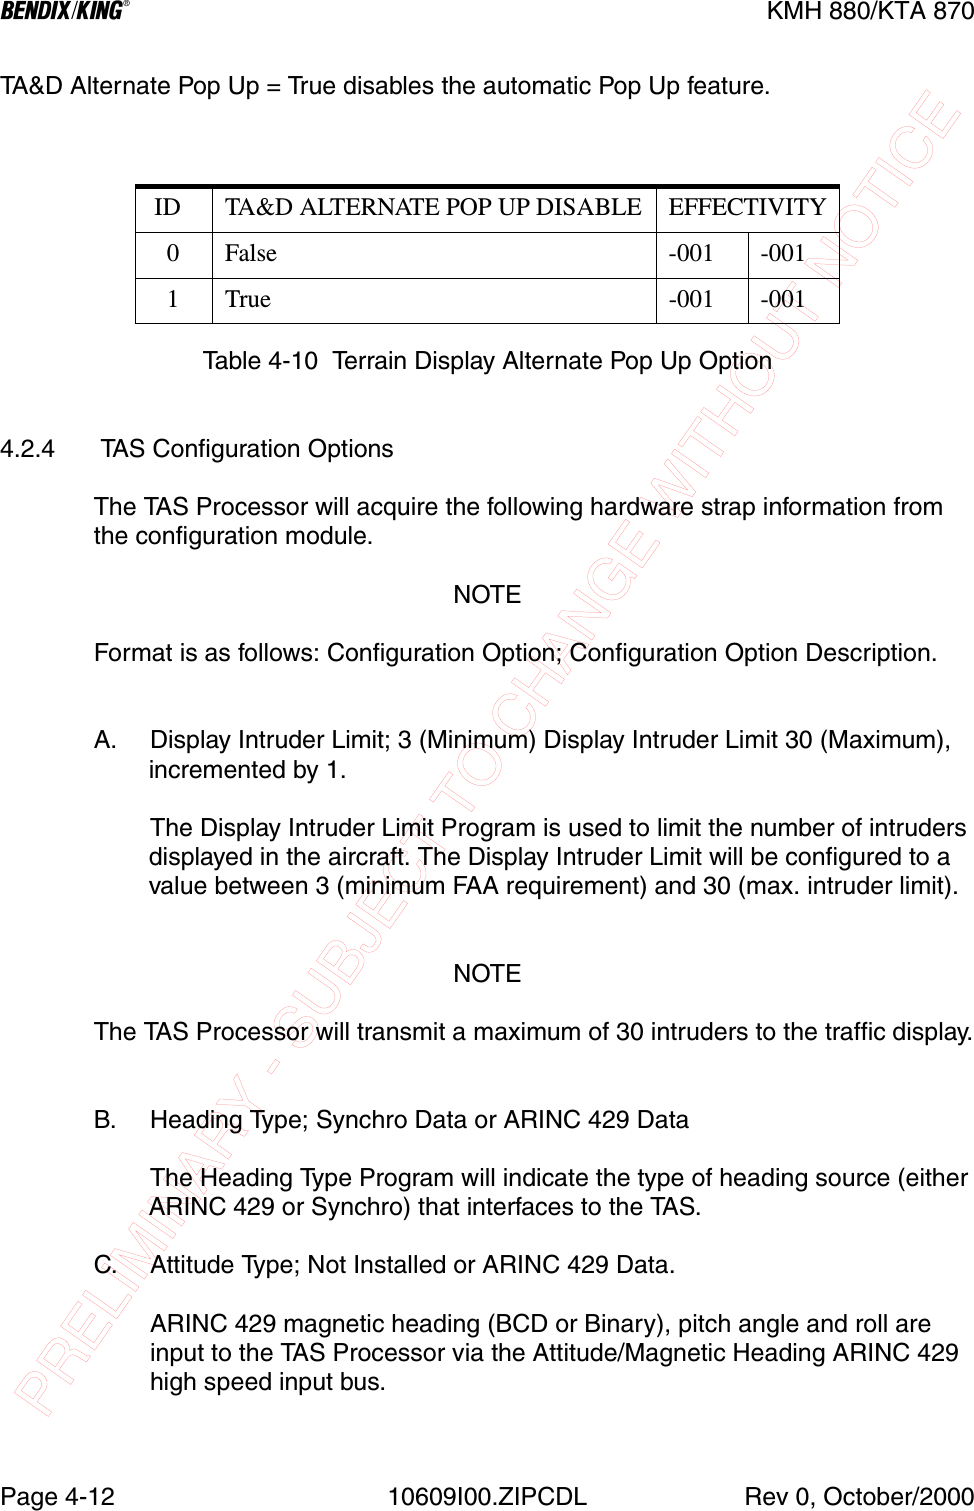 PRELIMINARY - SUBJECT TO CHANGE WITHOUT NOTICEBKMH 880/KTA 870Page 4-12 10609I00.ZIPCDL Rev 0, October/2000TA&amp;D Alternate Pop Up = True disables the automatic Pop Up feature.Table 4-10  Terrain Display Alternate Pop Up Option4.2.4  TAS Configuration OptionsThe TAS Processor will acquire the following hardware strap information from the configuration module.NOTEFormat is as follows: Configuration Option; Configuration Option Description.A. Display Intruder Limit; 3 (Minimum) Display Intruder Limit 30 (Maximum), incremented by 1.The Display Intruder Limit Program is used to limit the number of intruders displayed in the aircraft. The Display Intruder Limit will be configured to a value between 3 (minimum FAA requirement) and 30 (max. intruder limit).NOTEThe TAS Processor will transmit a maximum of 30 intruders to the traffic display.B. Heading Type; Synchro Data or ARINC 429 DataThe Heading Type Program will indicate the type of heading source (either ARINC 429 or Synchro) that interfaces to the TAS. C. Attitude Type; Not Installed or ARINC 429 Data.  ARINC 429 magnetic heading (BCD or Binary), pitch angle and roll are input to the TAS Processor via the Attitude/Magnetic Heading ARINC 429 high speed input bus. ID TA&amp;D ALTERNATE POP UP DISABLE EFFECTIVITY   0 False -001 -001   1 True -001 -001